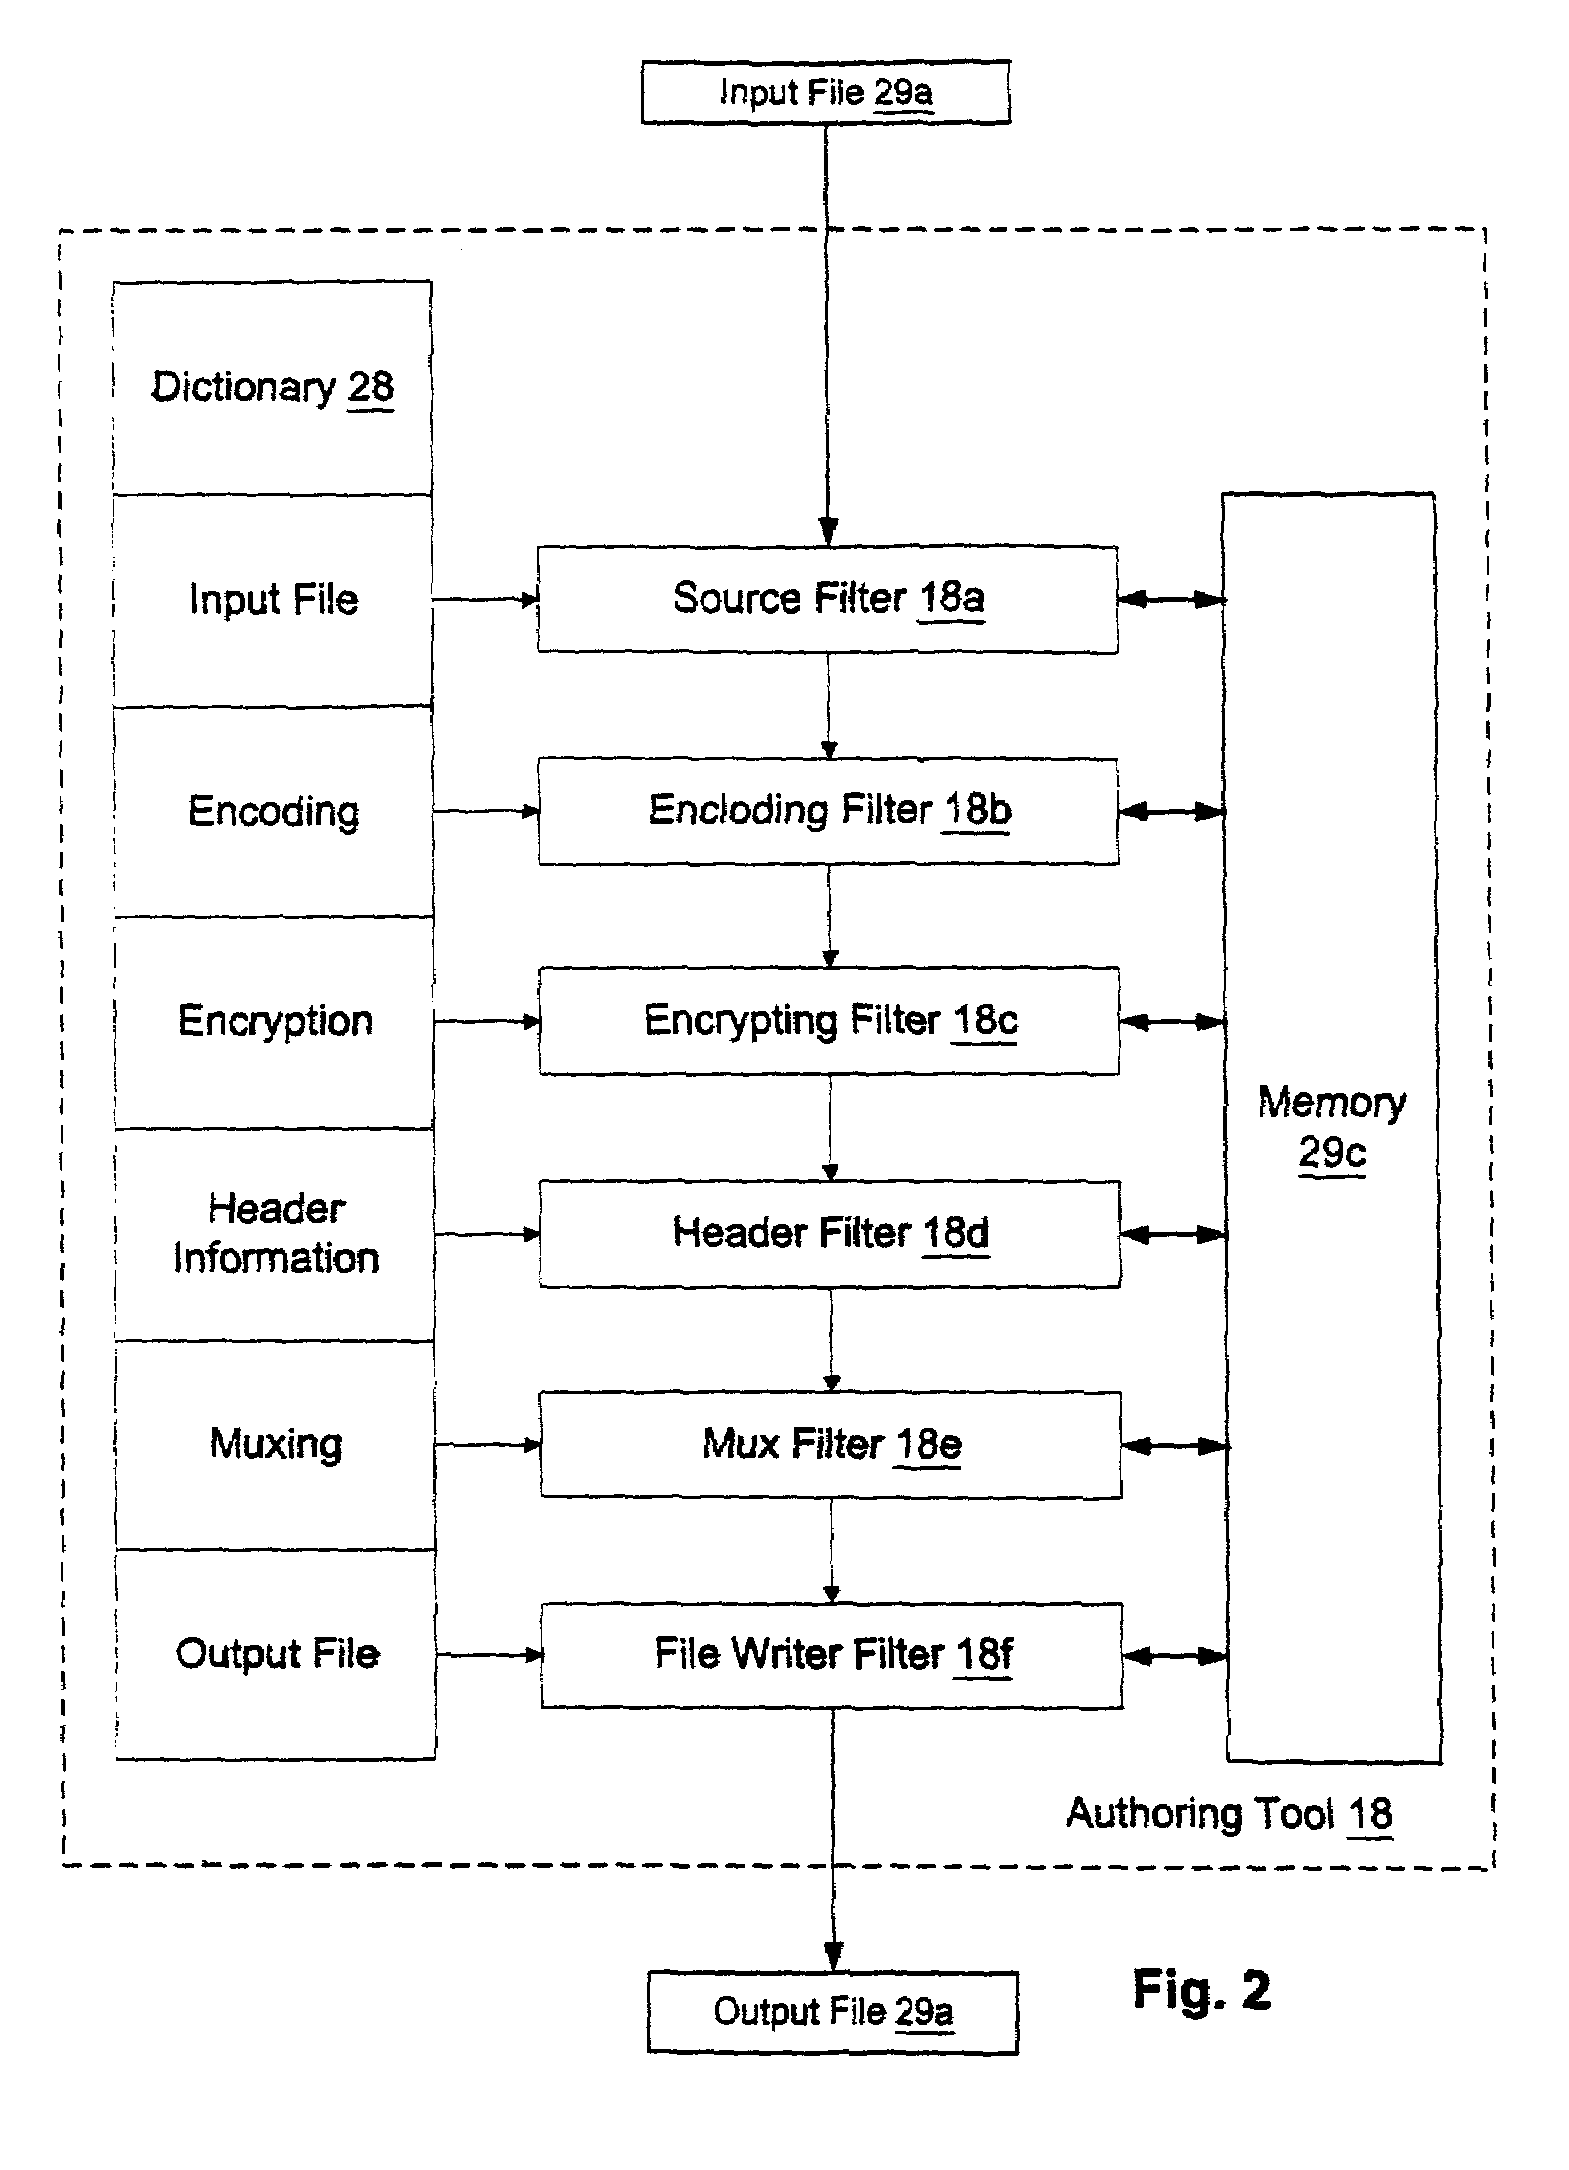 Enforcement architecture and method for digital rights management system for roaming a license to a plurality of user devices